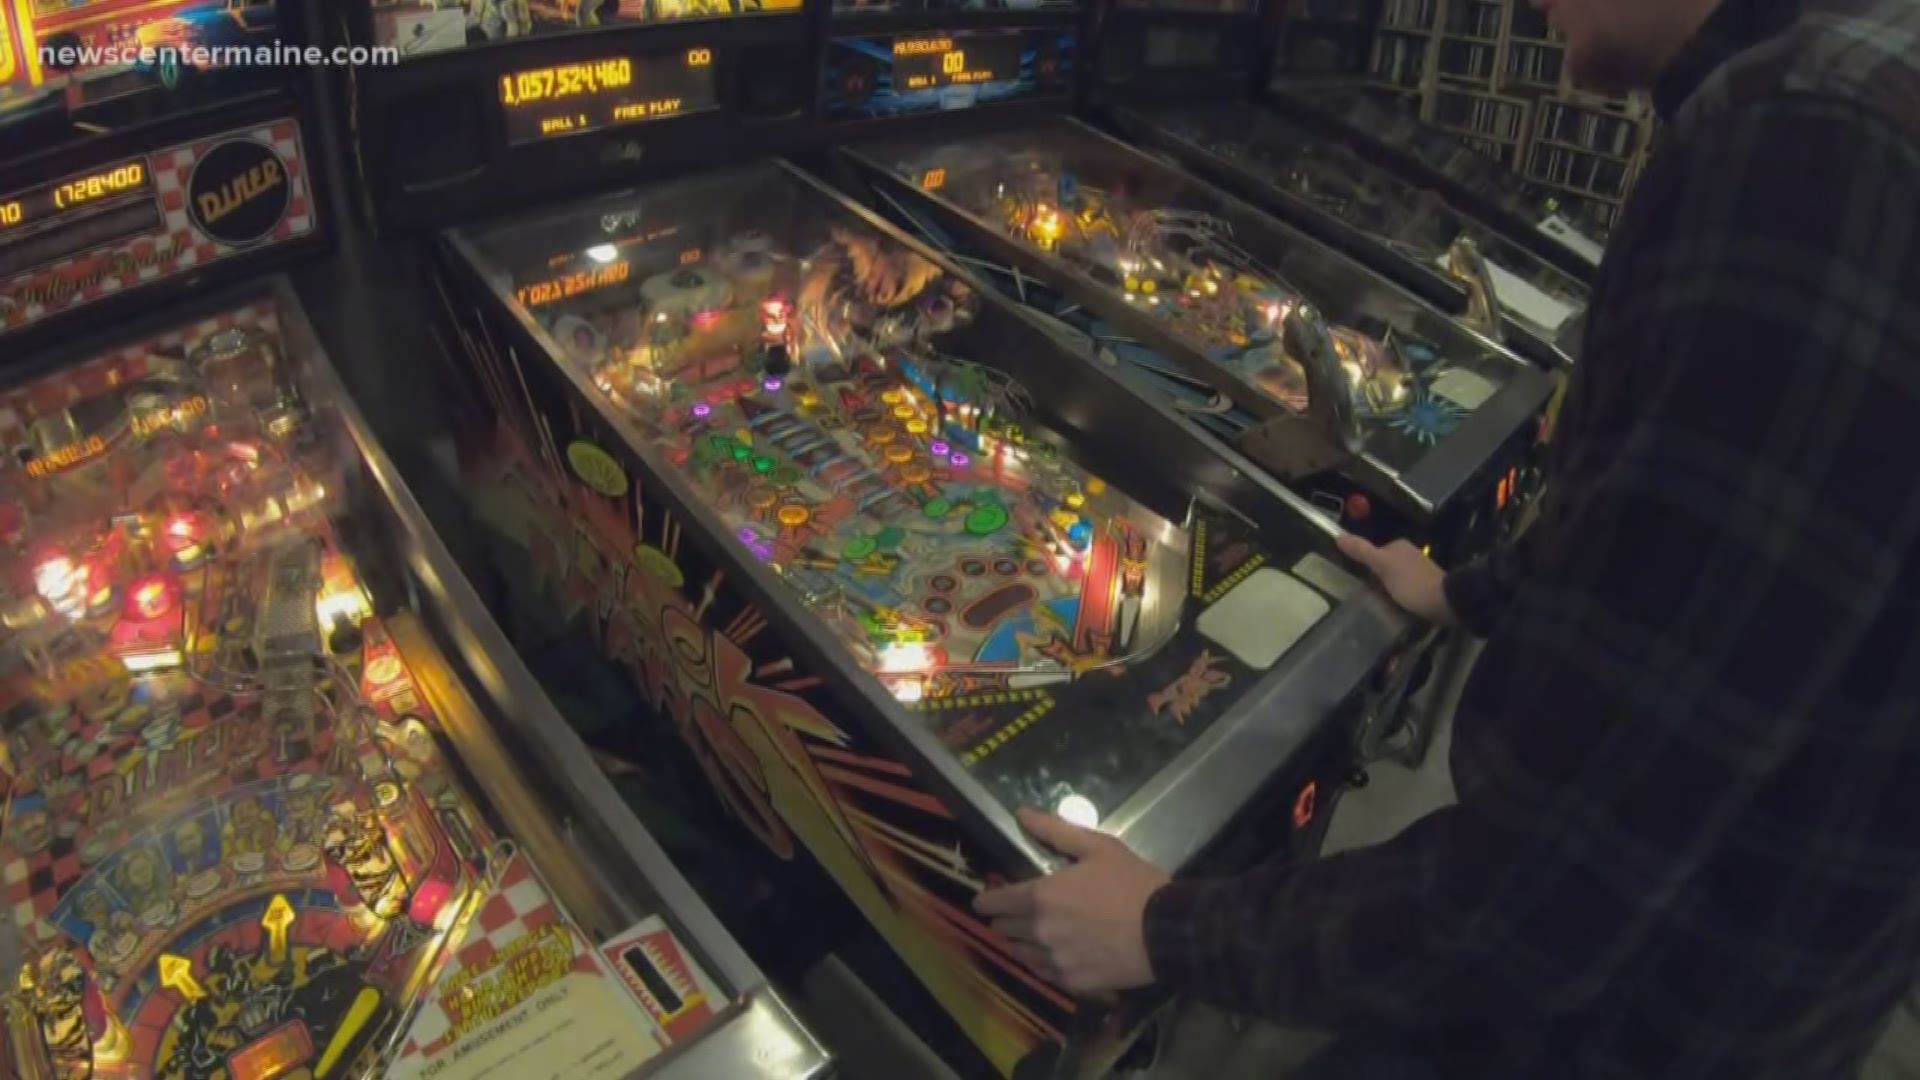 Keeping the game of pinball alive